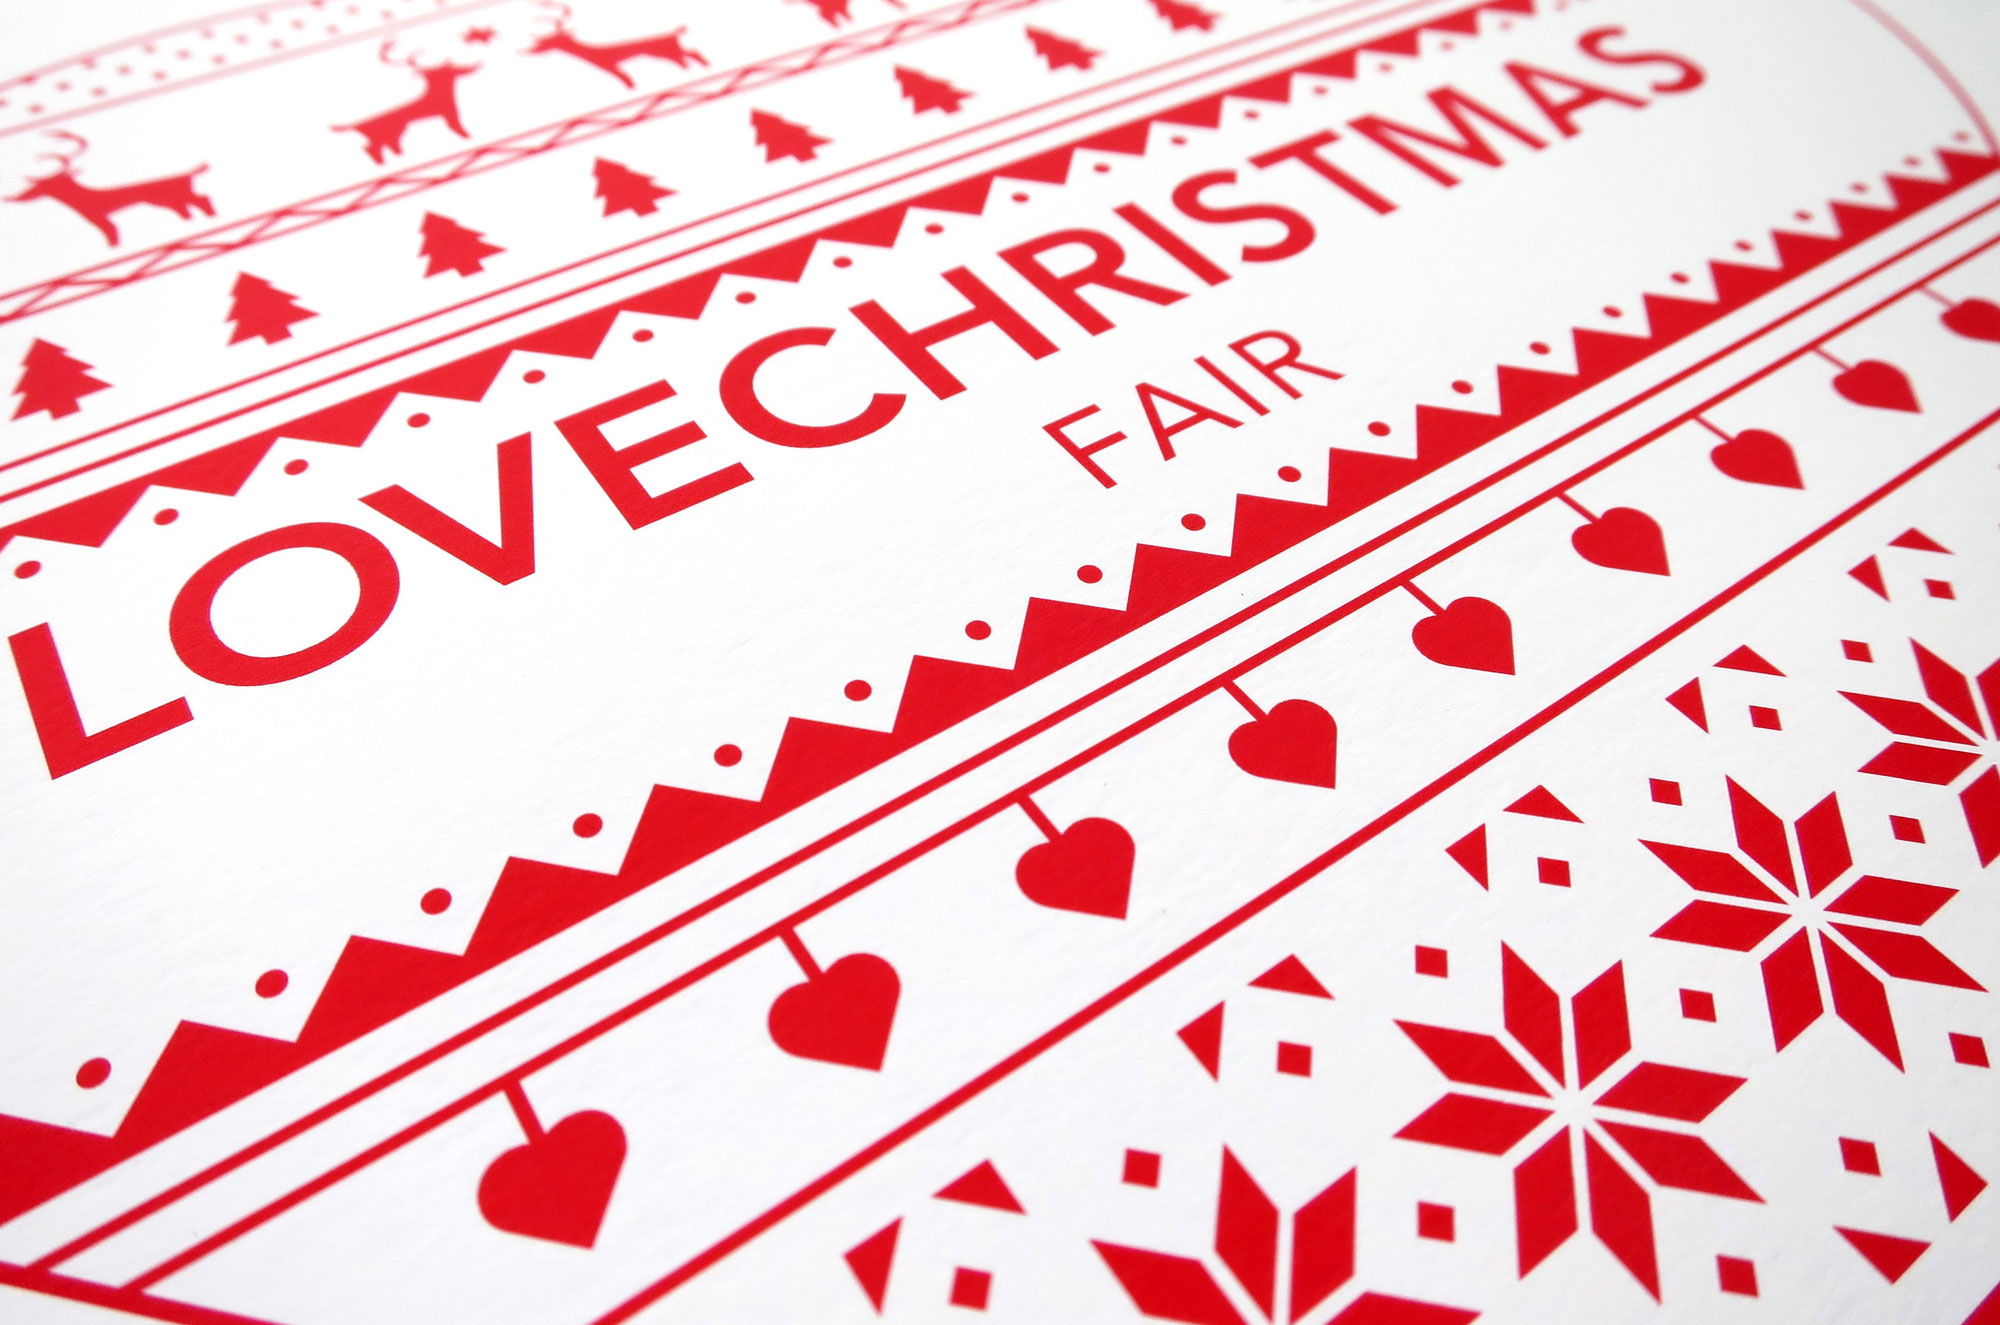 LoveChristmas Cover Image